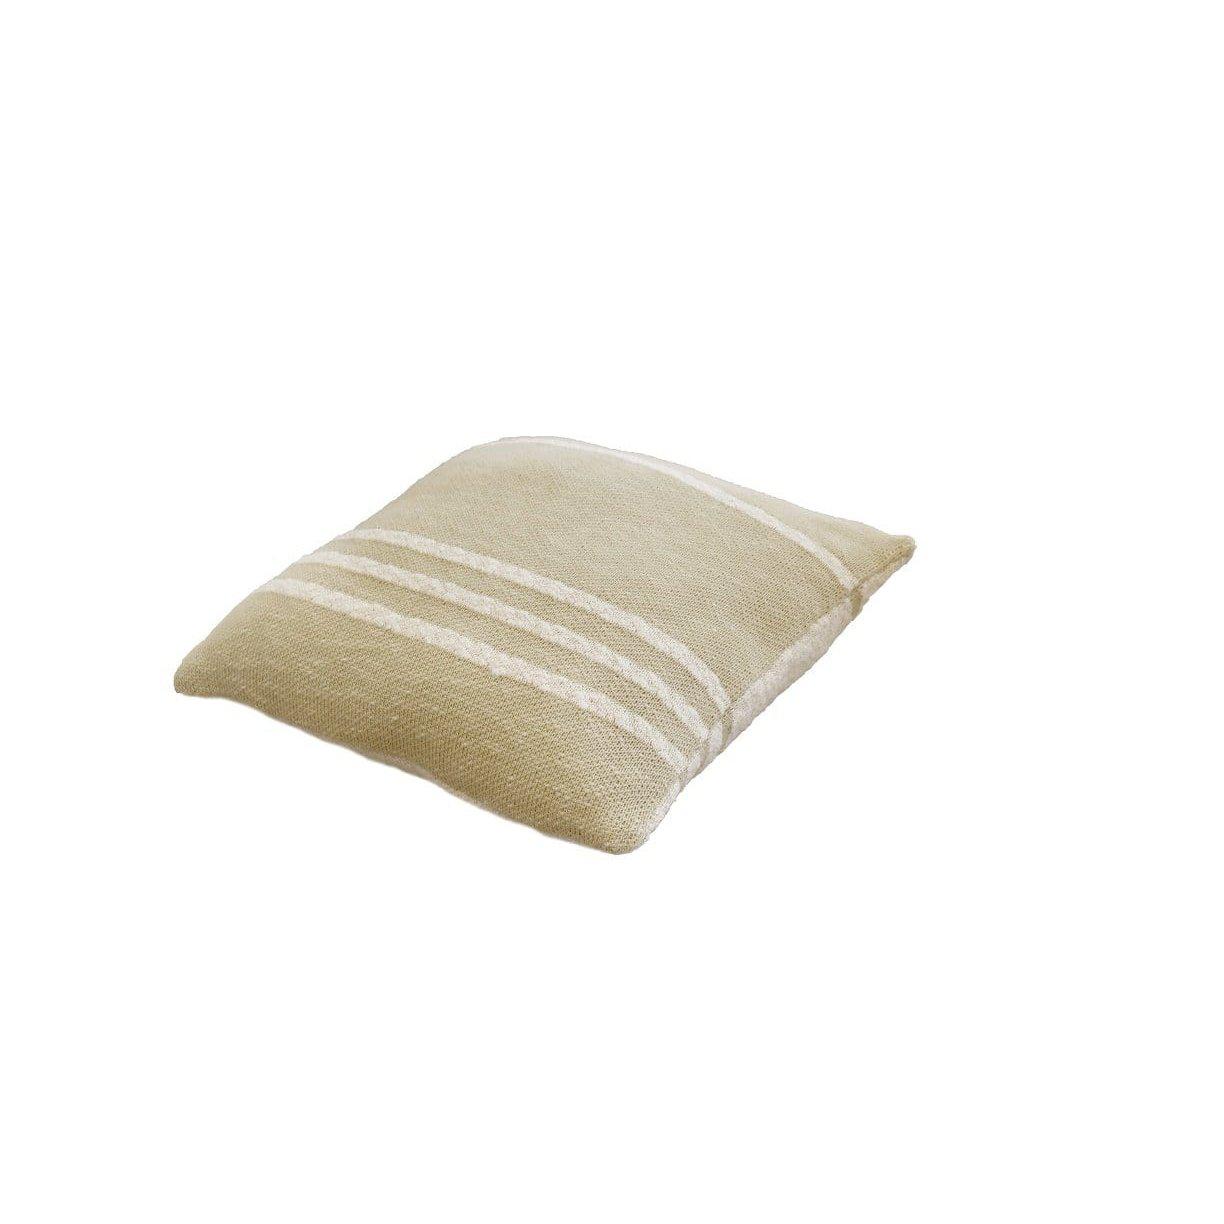 Rugs by Roo | Lorena Canals Duetto Olive Natural Knitted Cushion-SC-DUETTO-OLV